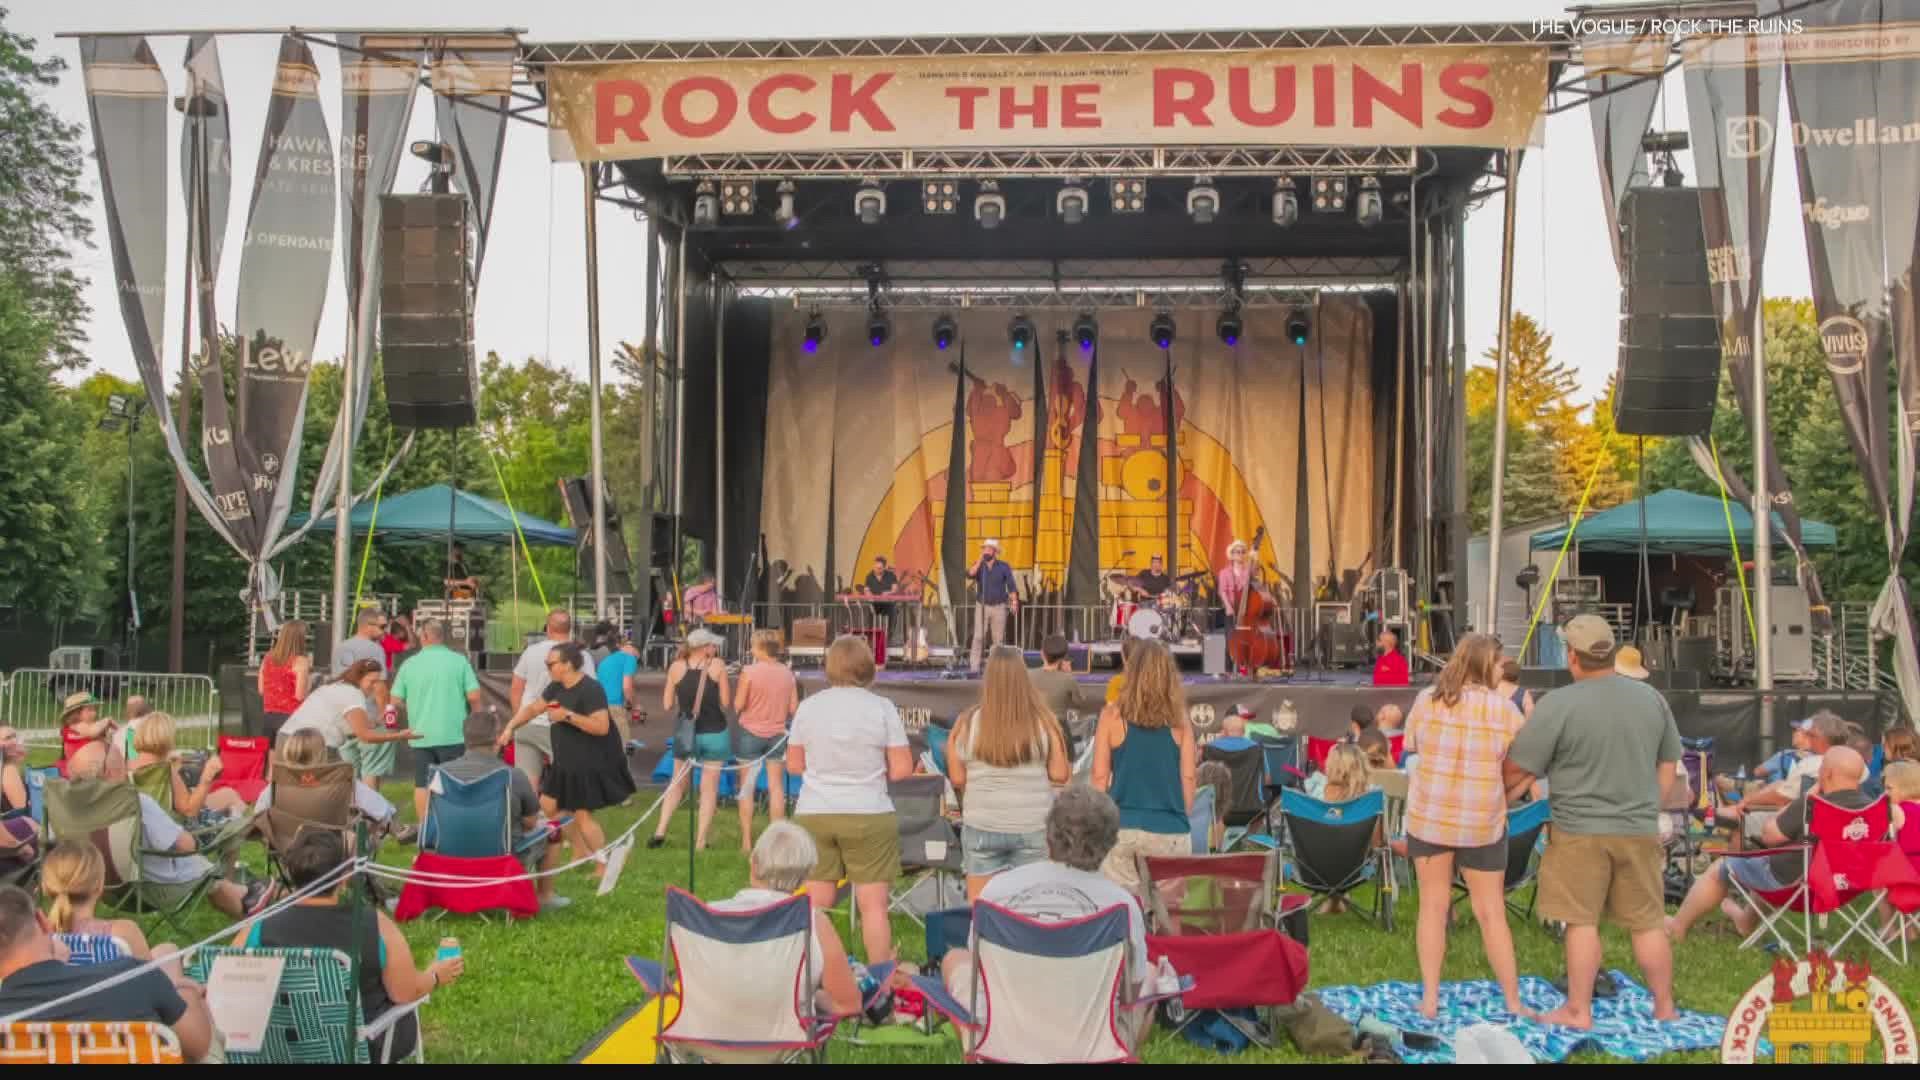 Rock the Ruins brings big musicians, crowds to Meridian Hills for